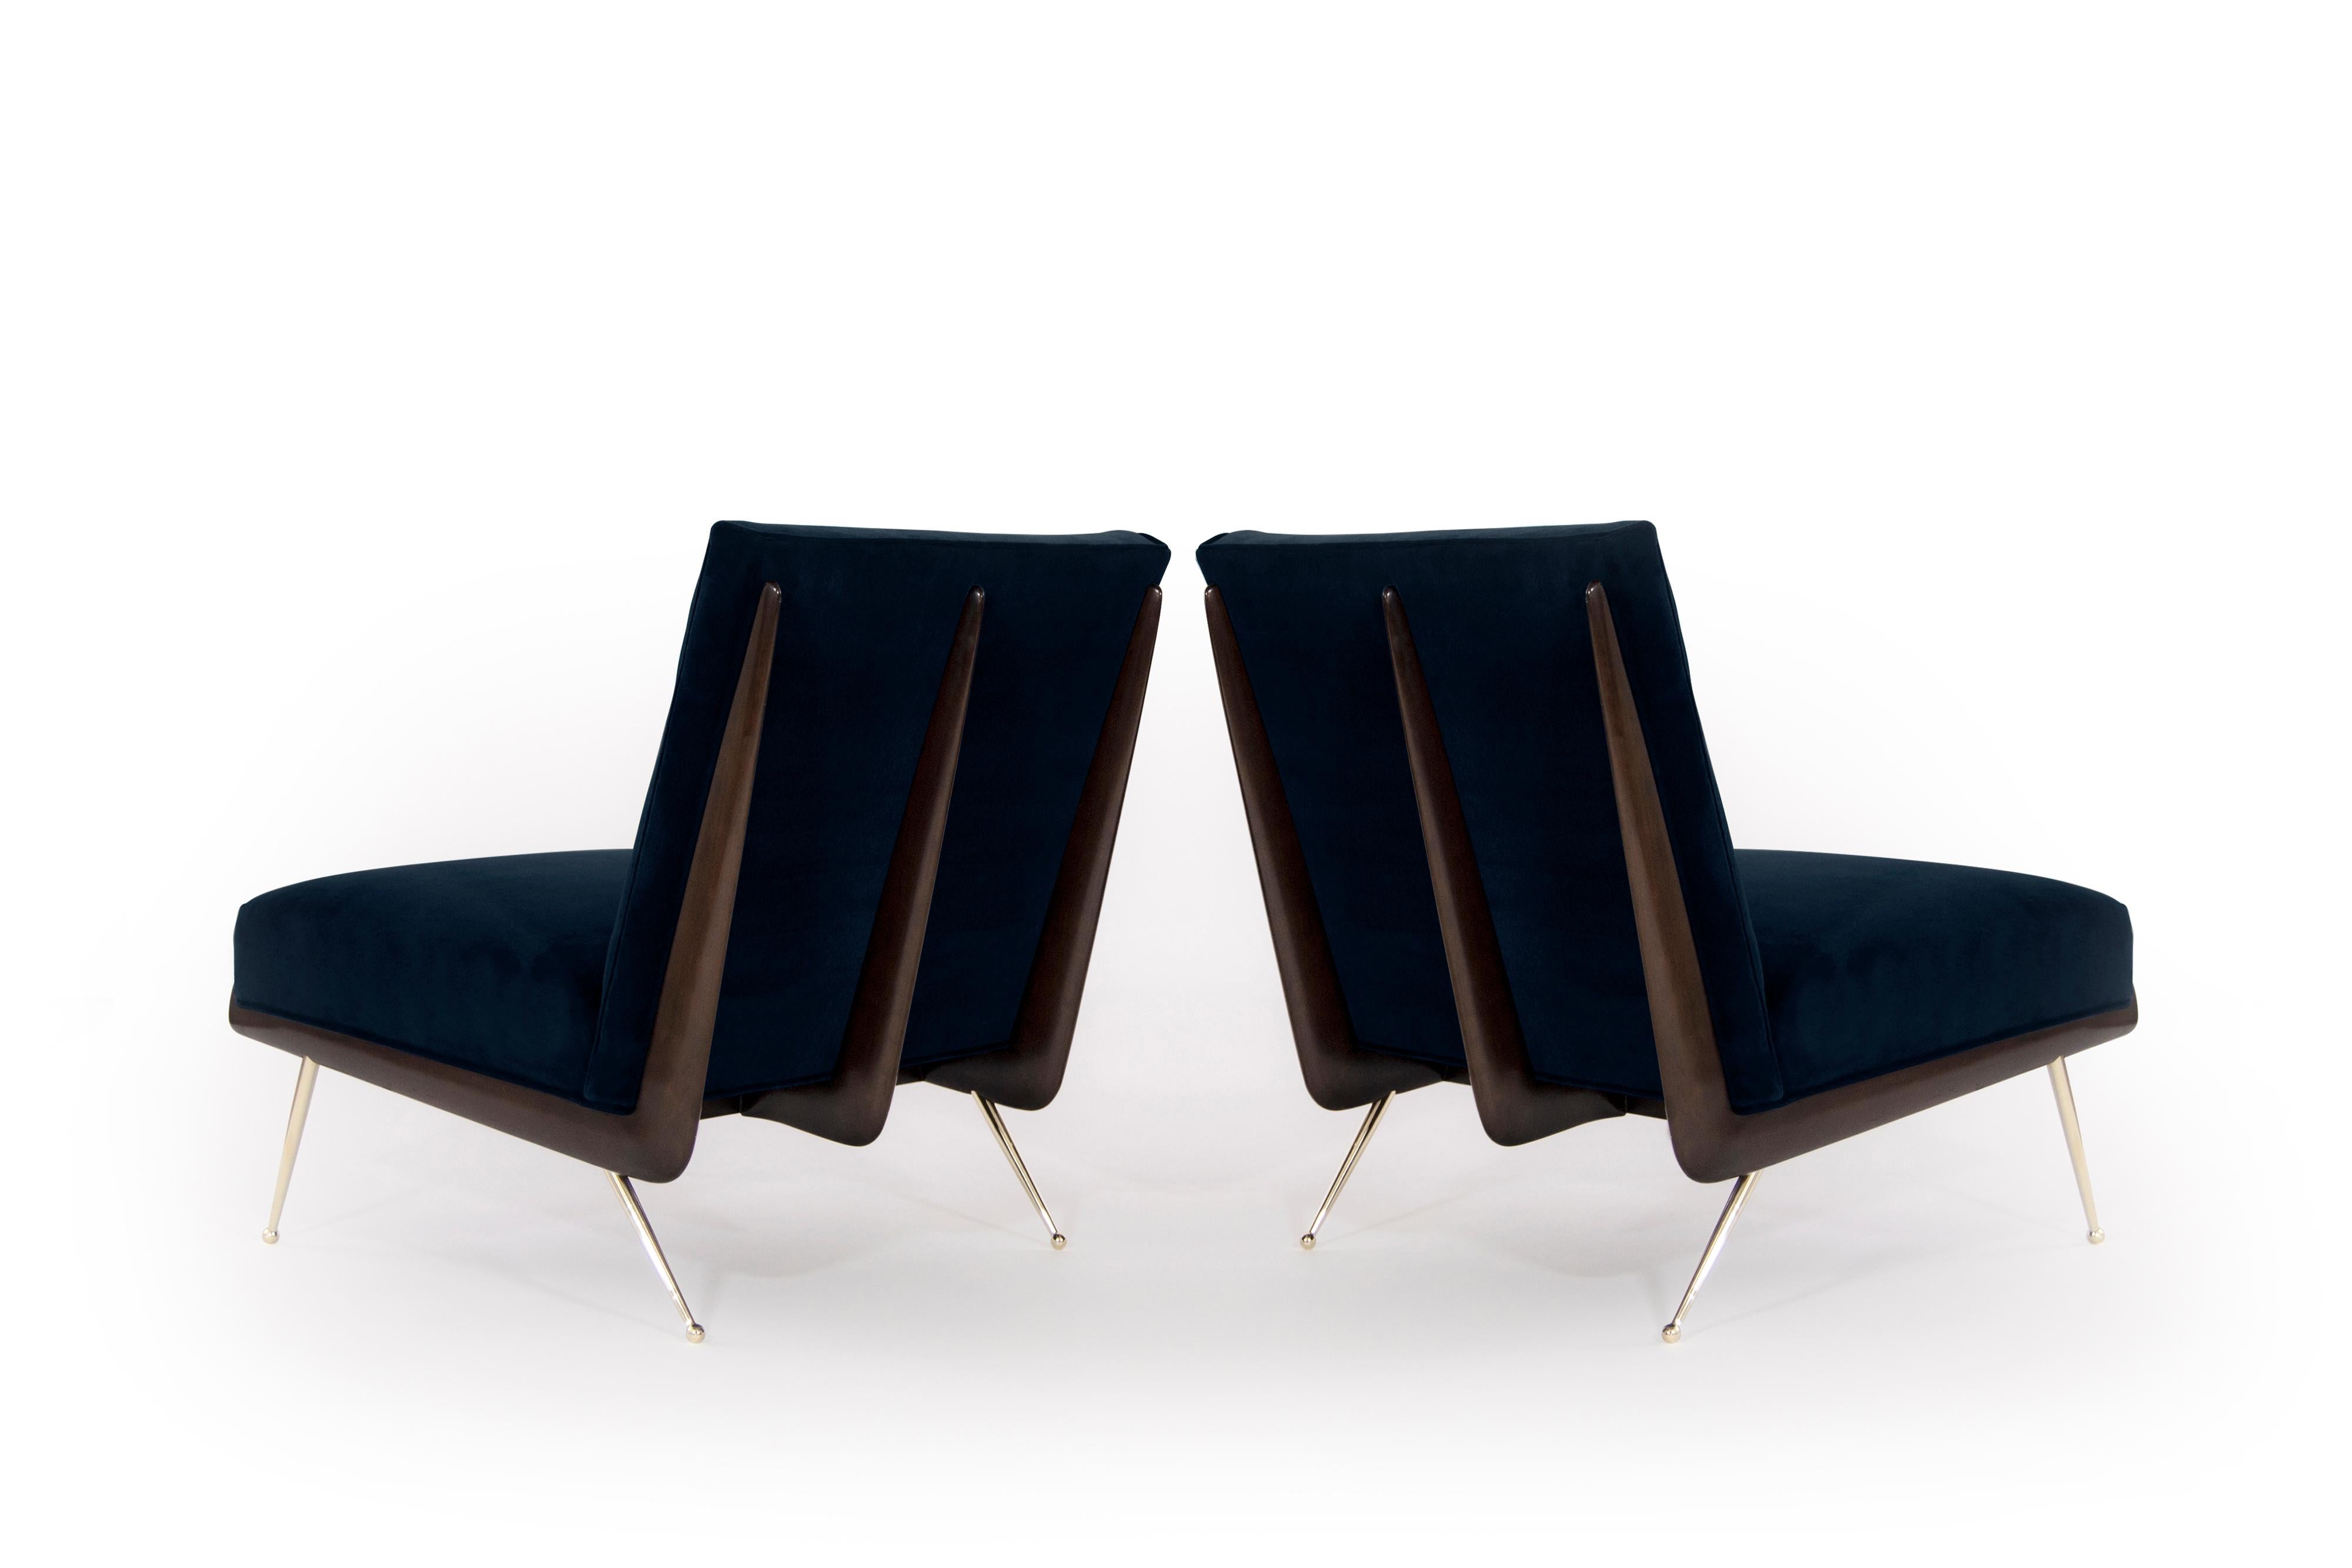 A phenomenal pair of lounge chairs in the style of Italian designer Gio Ponti, circa 1950s.

Boomerang shaped walnut frames fully restored to their original finish, newly upholstered in deep blue mohair. Thin tapered brass legs newly polished.